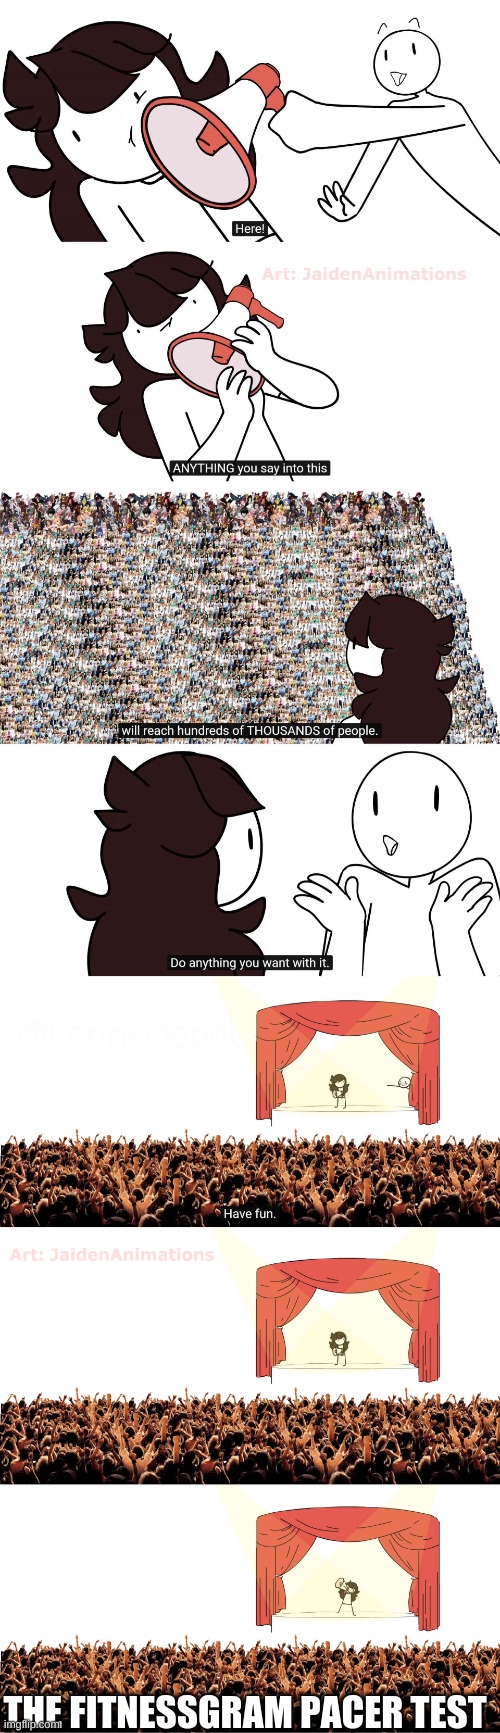 this is dumb | THE FITNESSGRAM PACER TEST | image tagged in jaiden animations megaphone | made w/ Imgflip meme maker